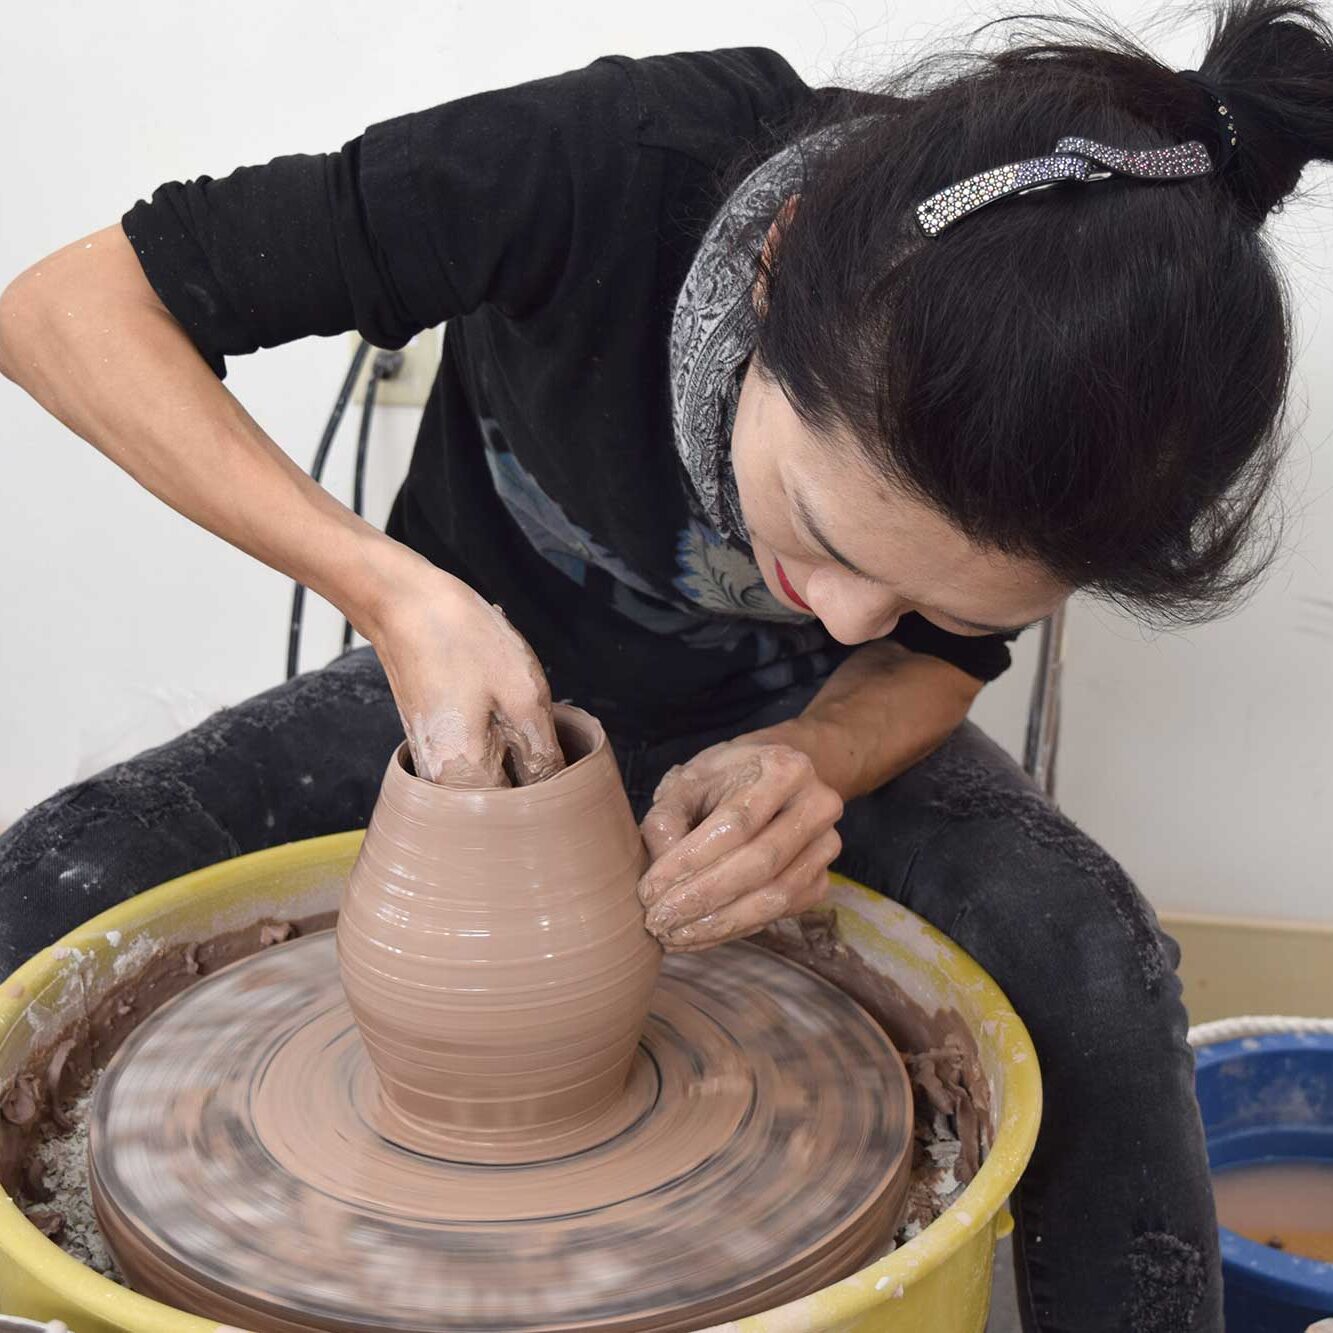 Personal forming a vase on a clay wheel